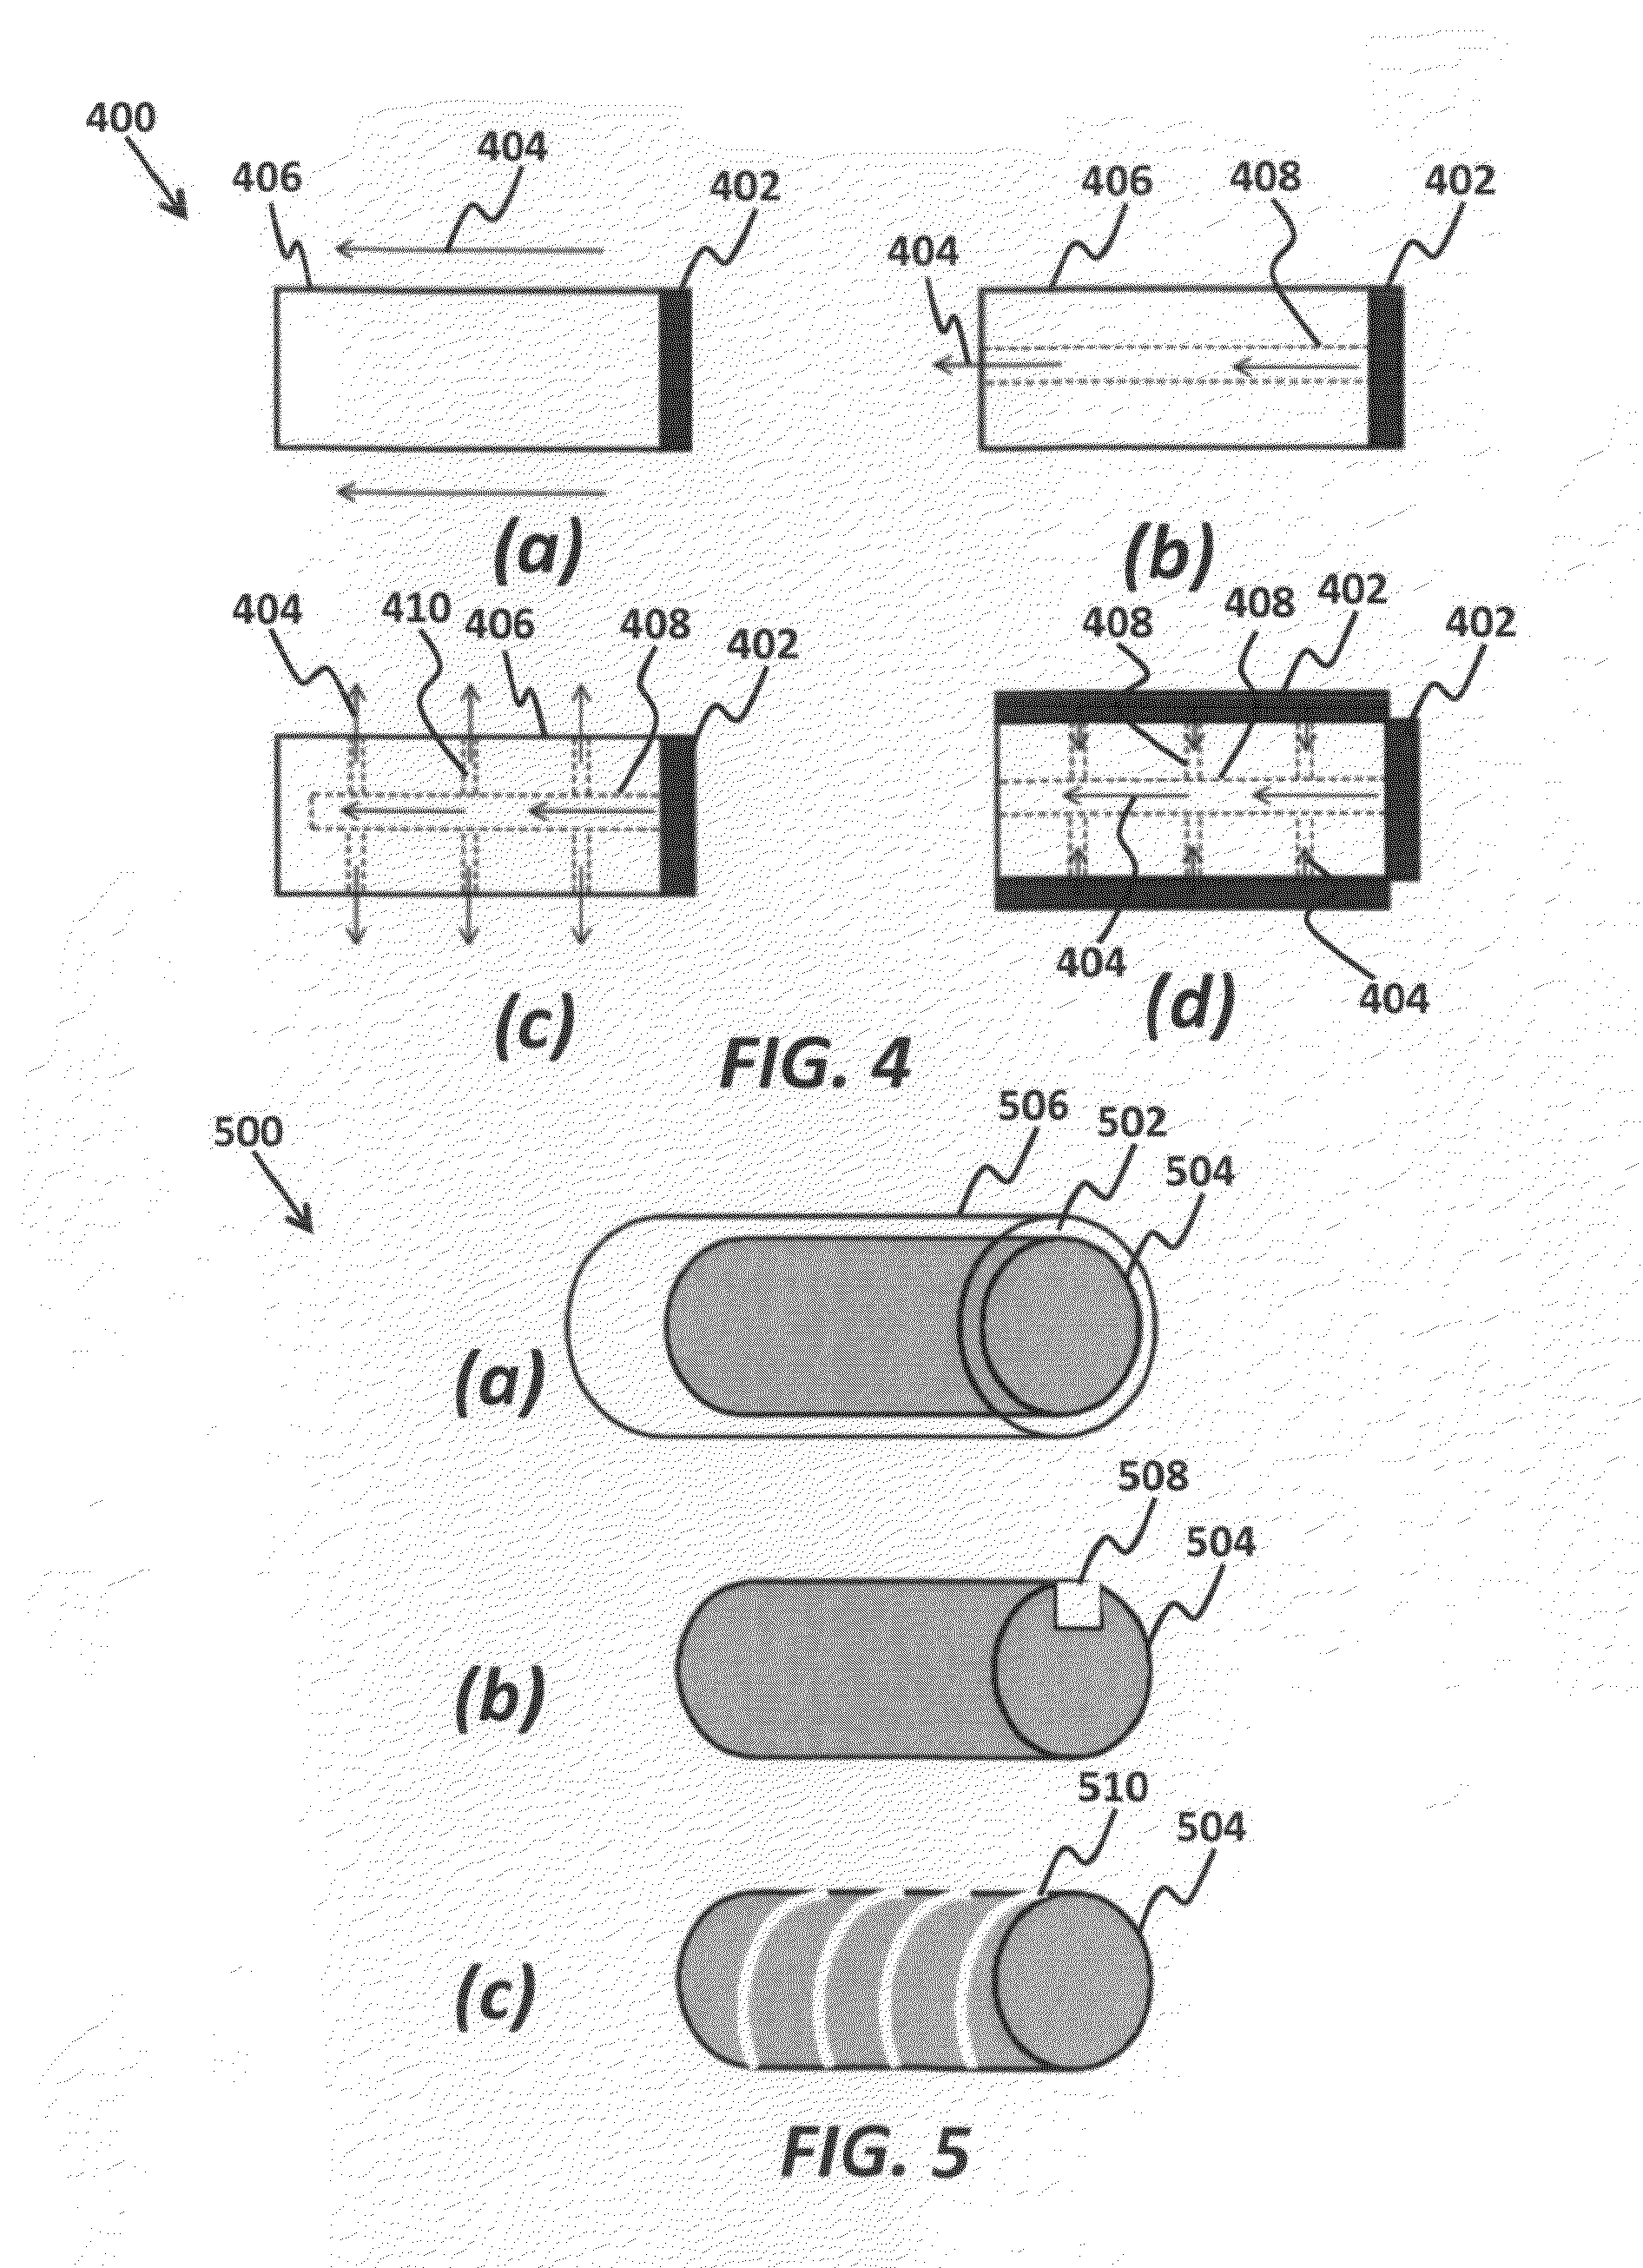 Chemical hydride formulation and system design for controlled generation of hydrogen